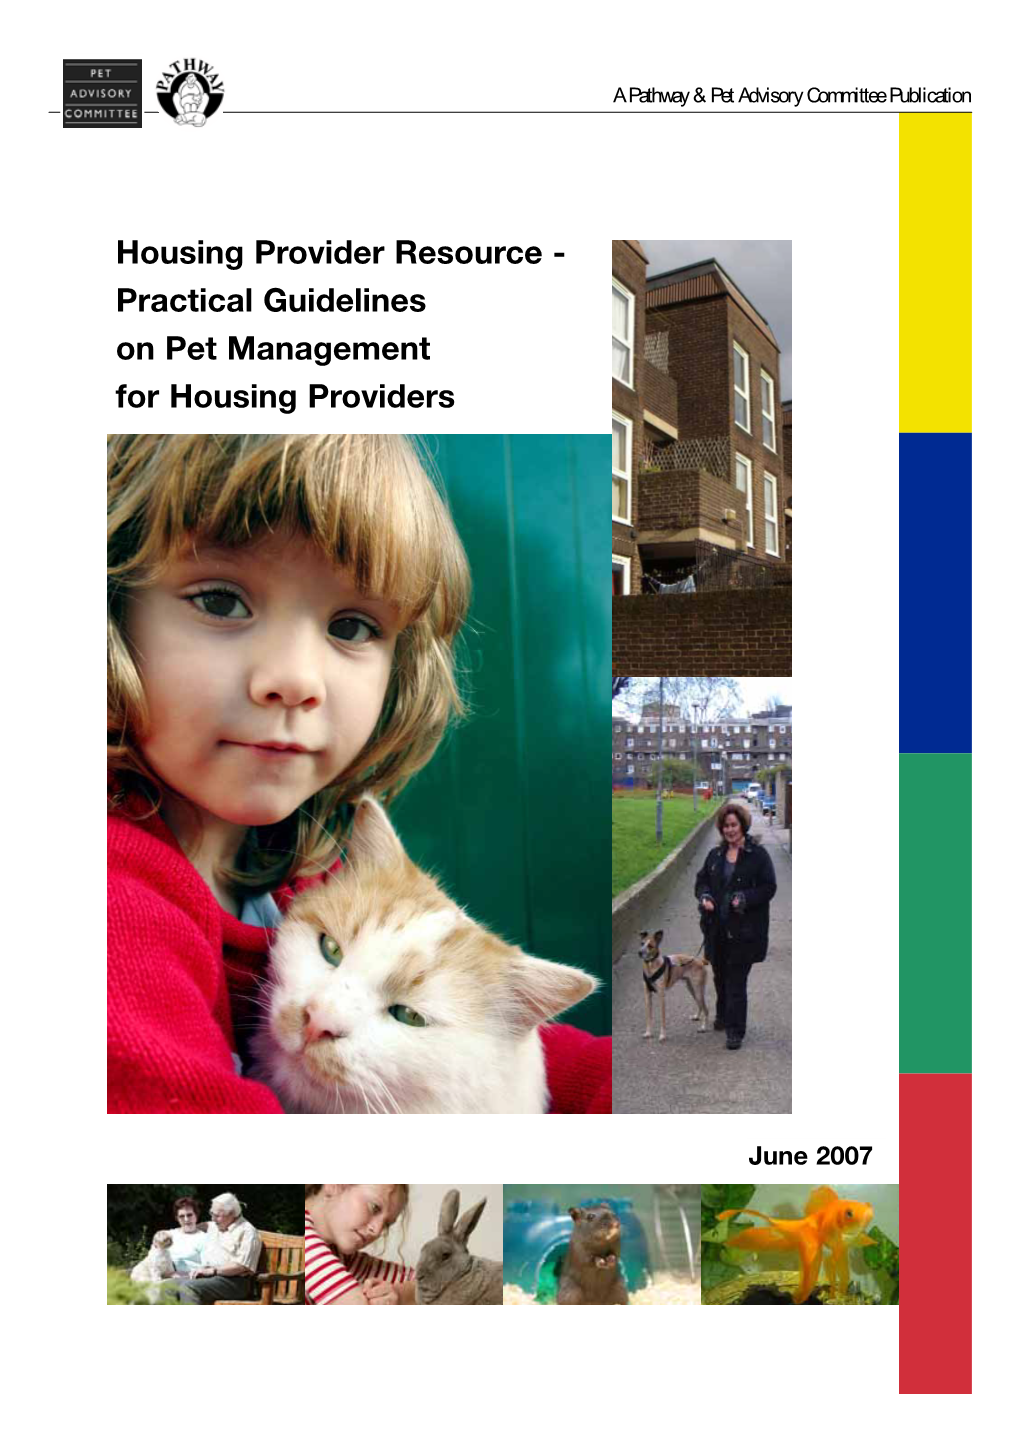 Practical Guidelines on Pet Management for Housing Providers